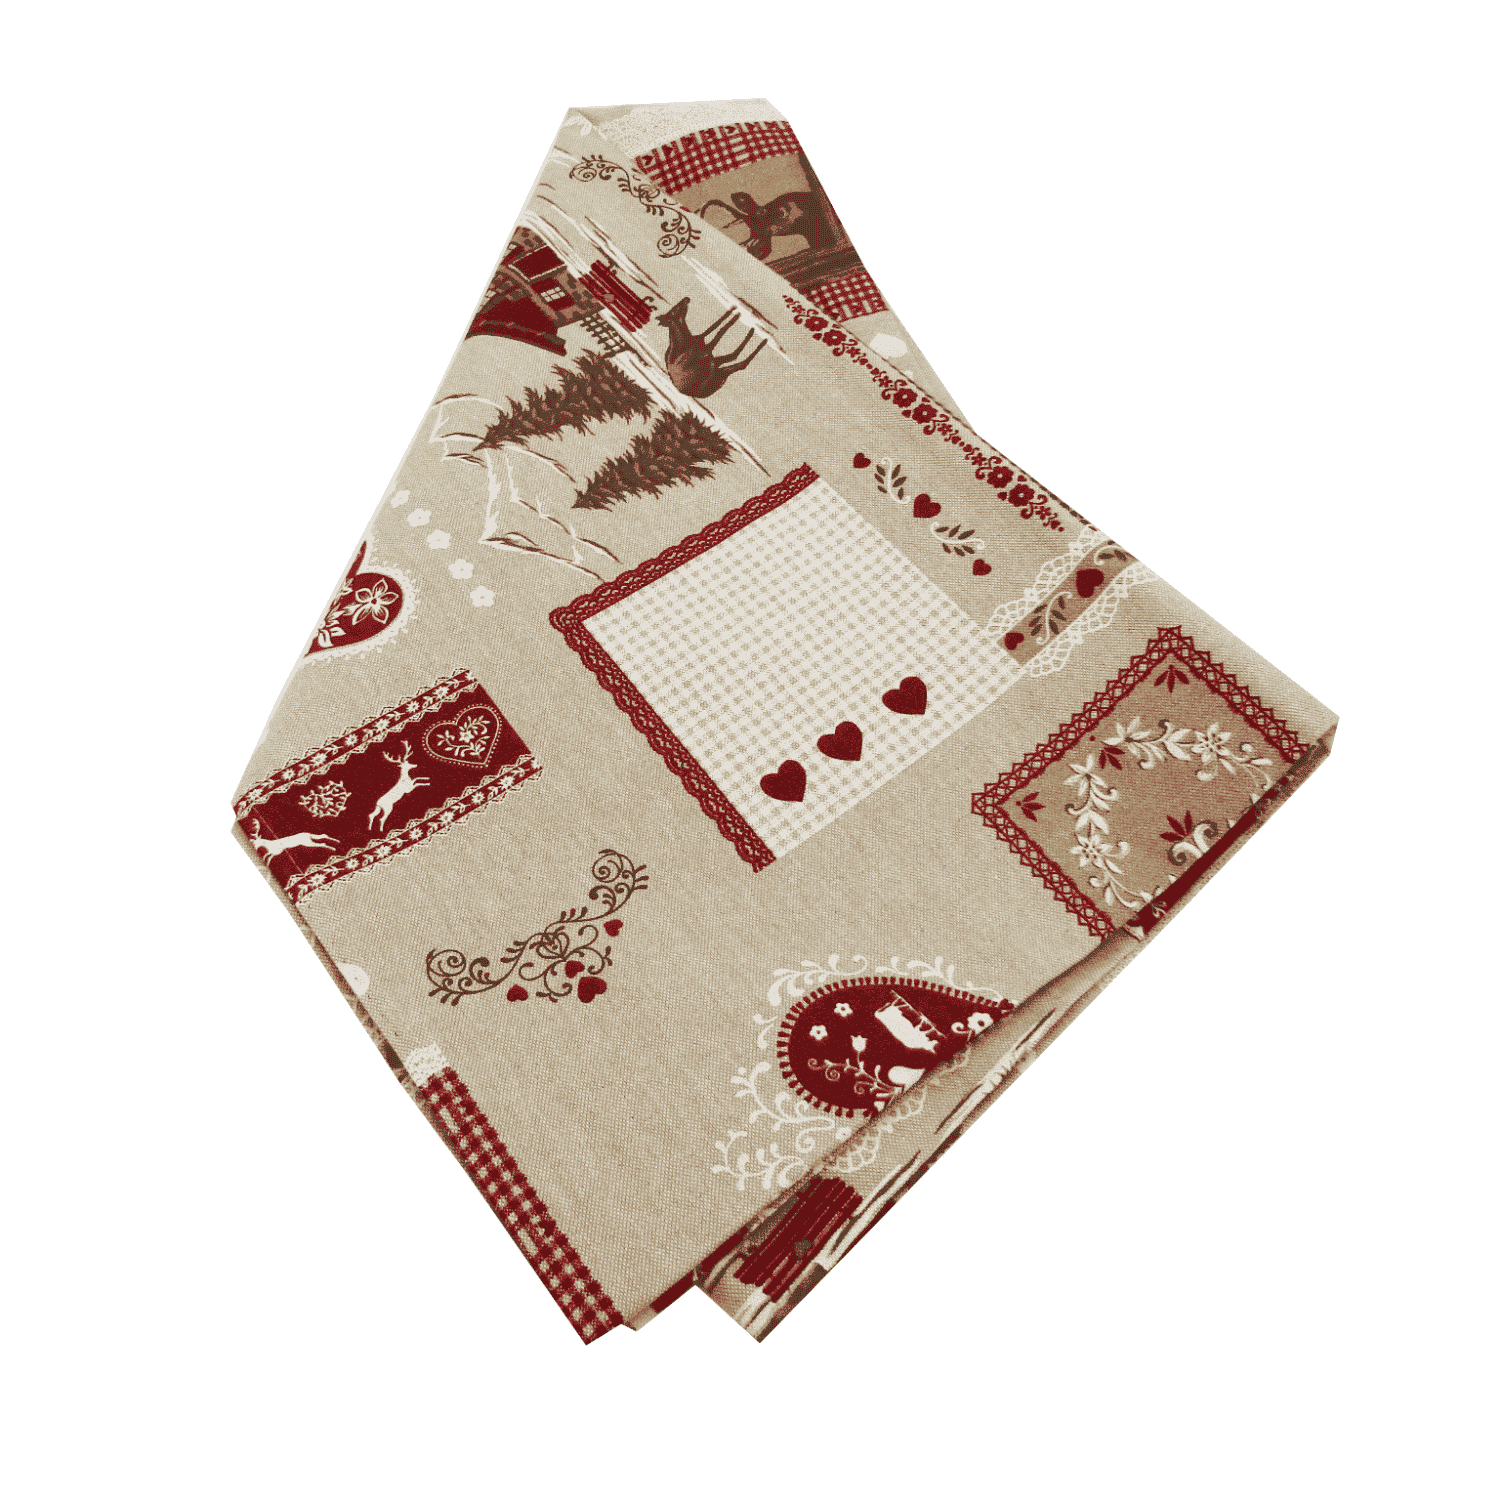 out-tovaglia-cotone-stampata-made-in-italy-miros-valbadia-tirolese-patchwork-montagna-rosso-beige-cervi-chalet-stella-alpina